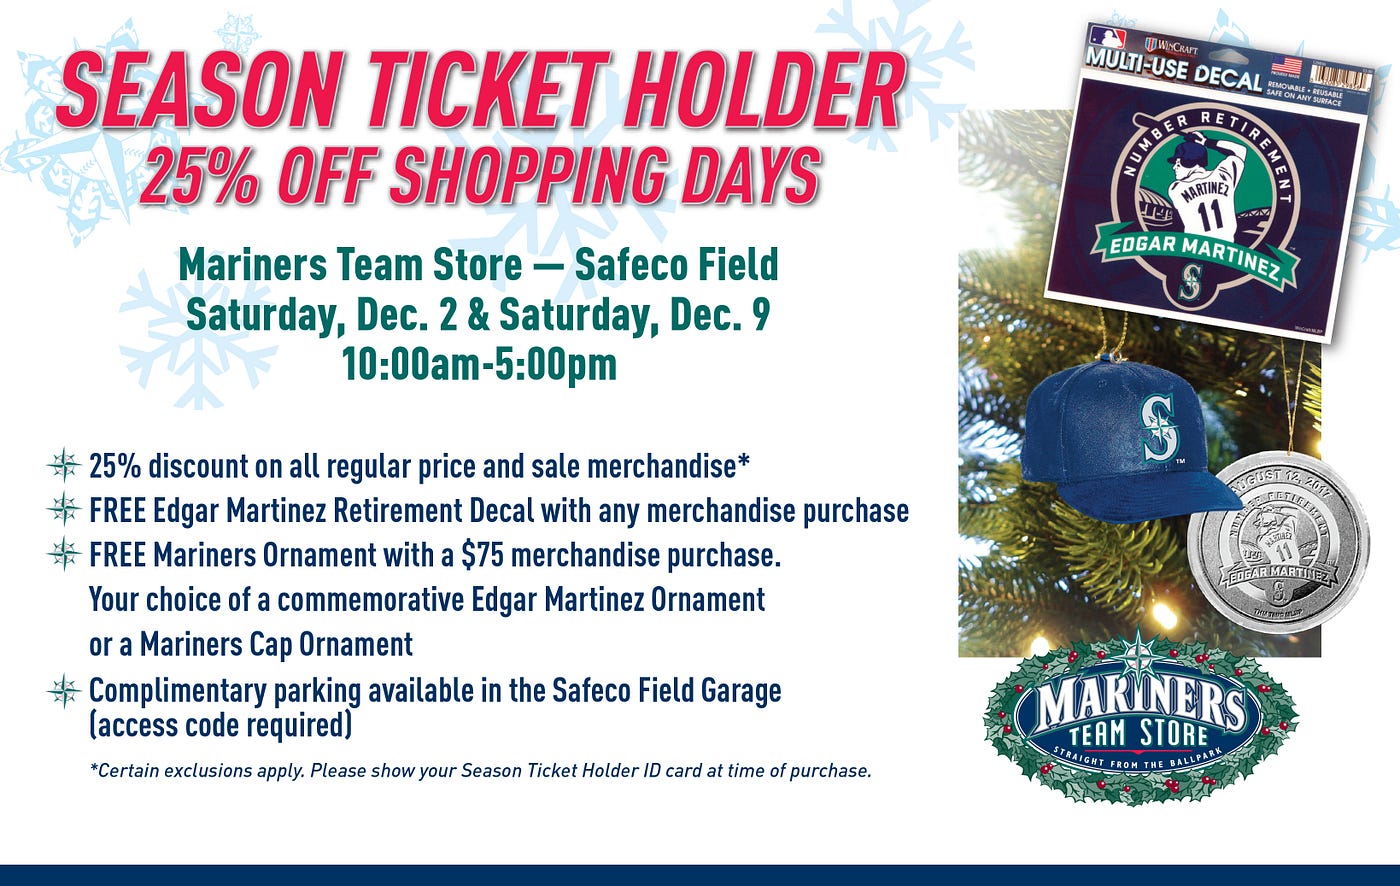 Mariners Team Store Events  From the Corner of Edgar & Dave